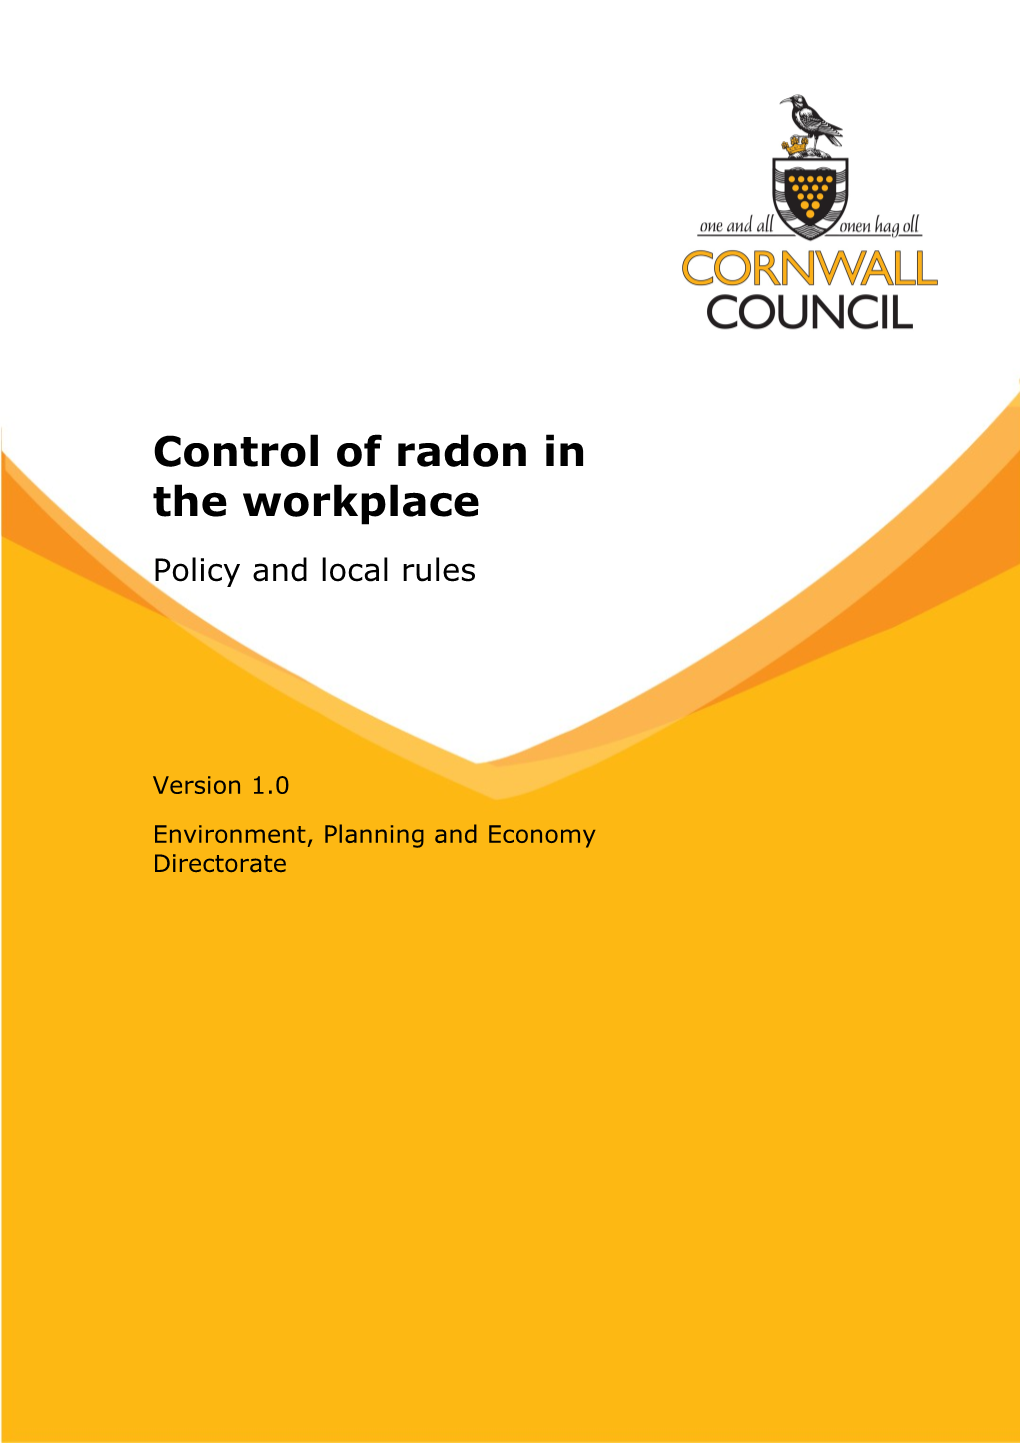 Control of Radon in the Workplace